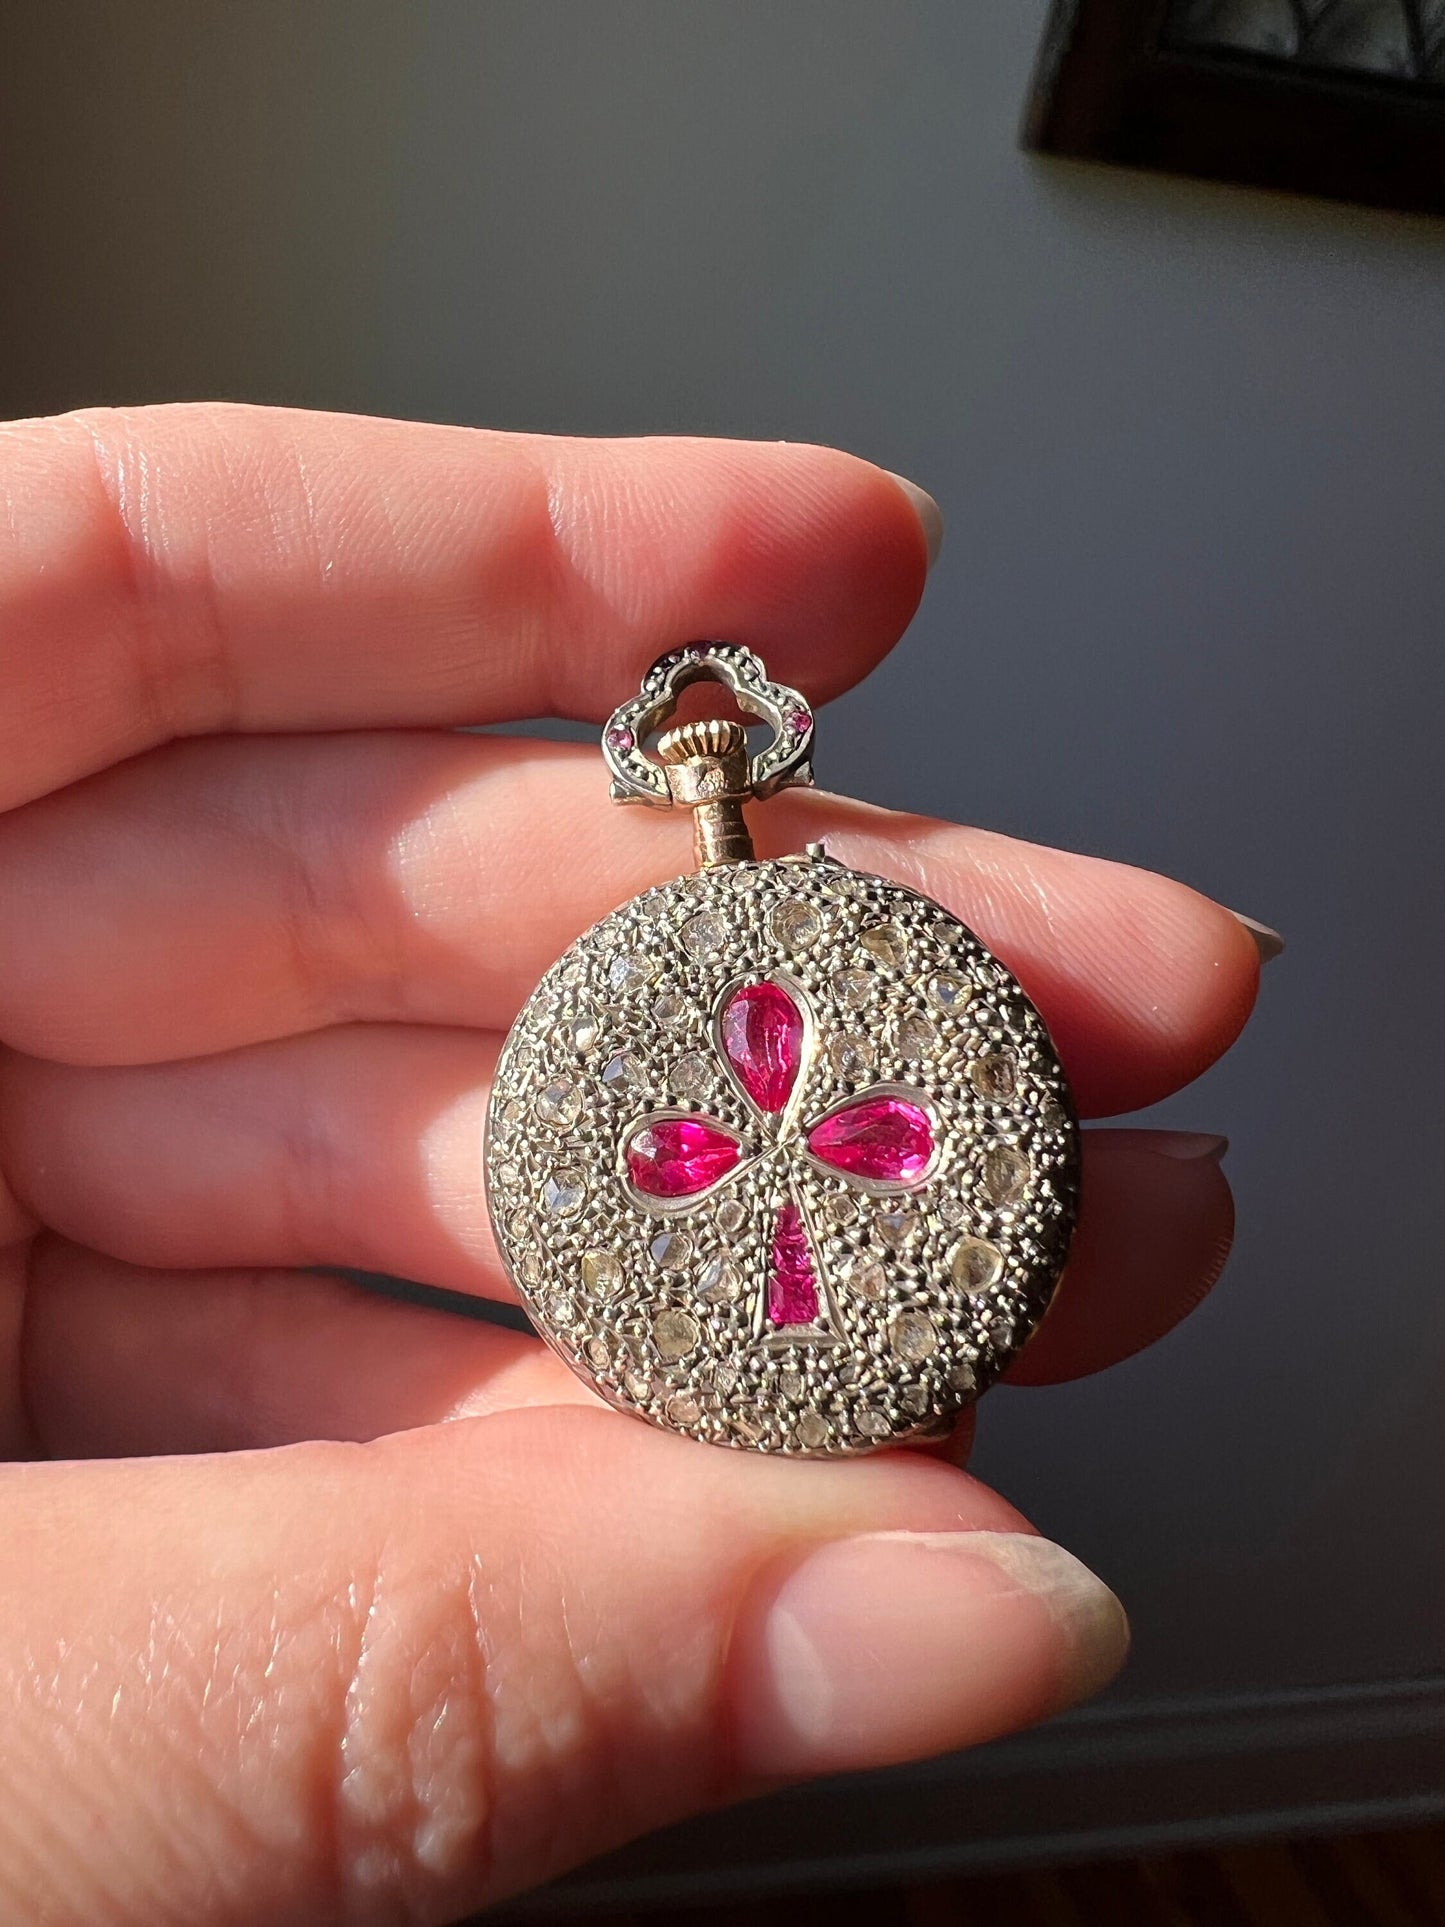 CLOVER Pink Ruby Rose Cut DIAMOND Encrusted French Antique 18k Gold Silver Pocket Watch Case Pendant Rare Victorian Figural Good Luck Gift